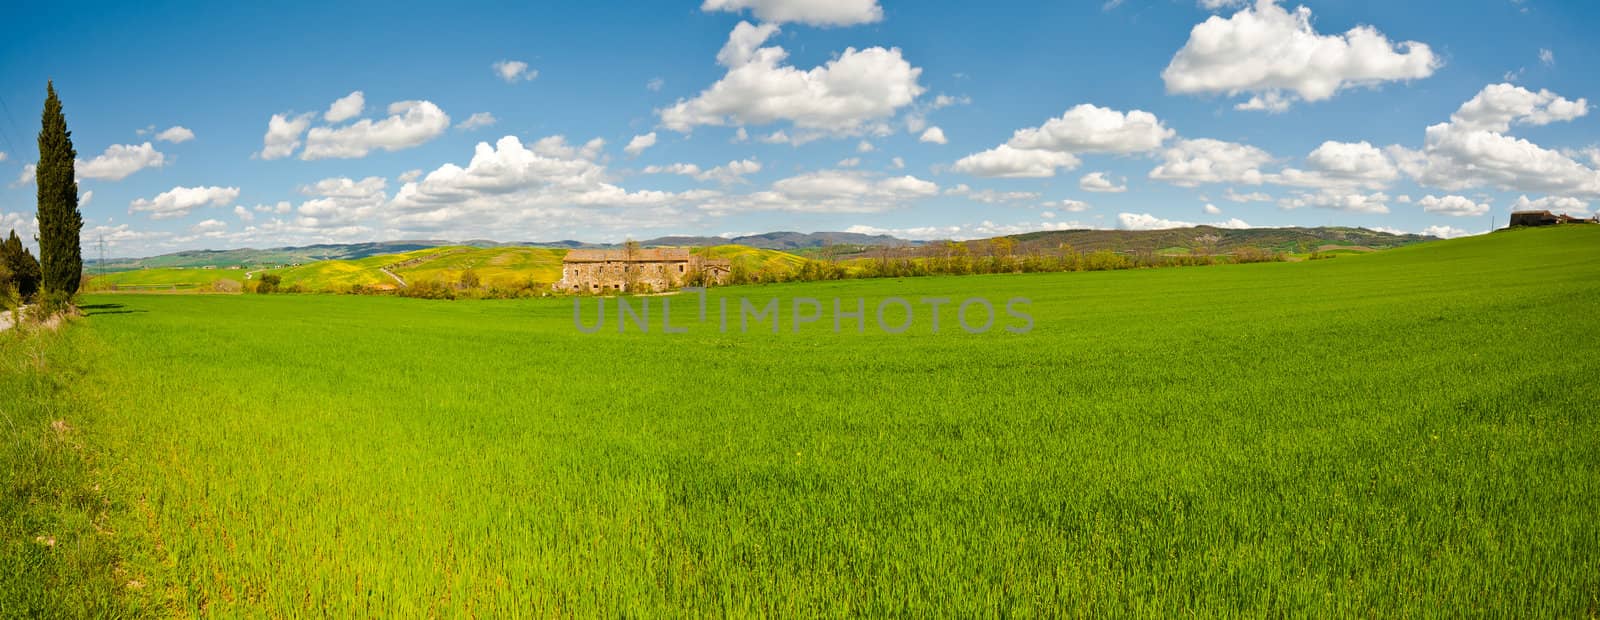 Farmhouse and Green Sloping Meadows of Tuscany